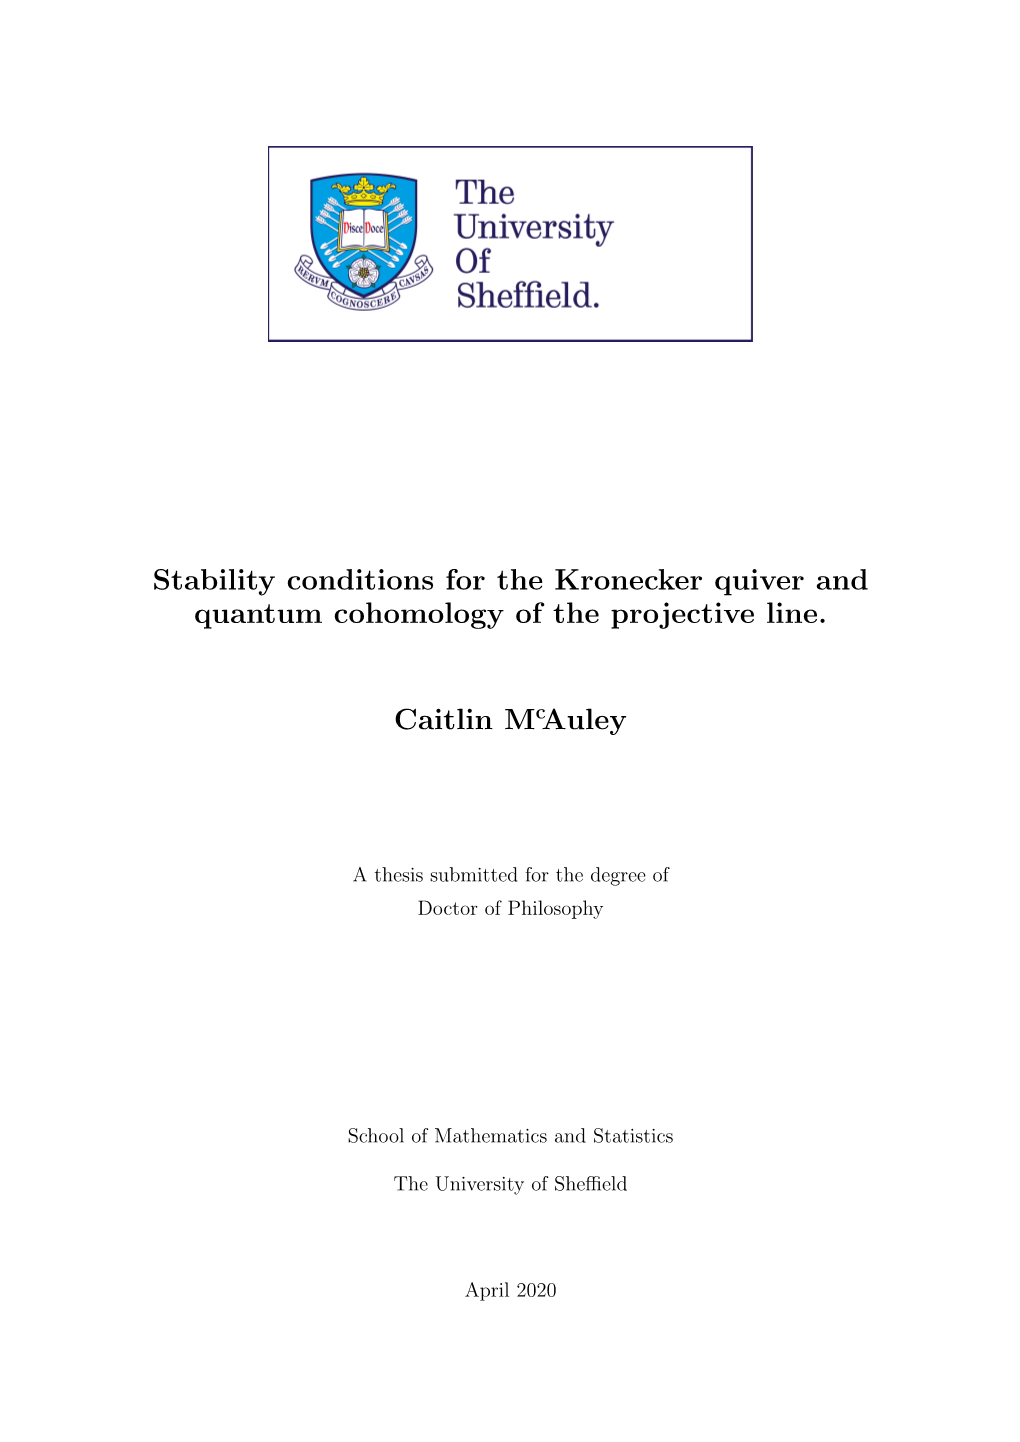 Stability Conditions for the Kronecker Quiver and Quantum Cohomology of the Projective Line